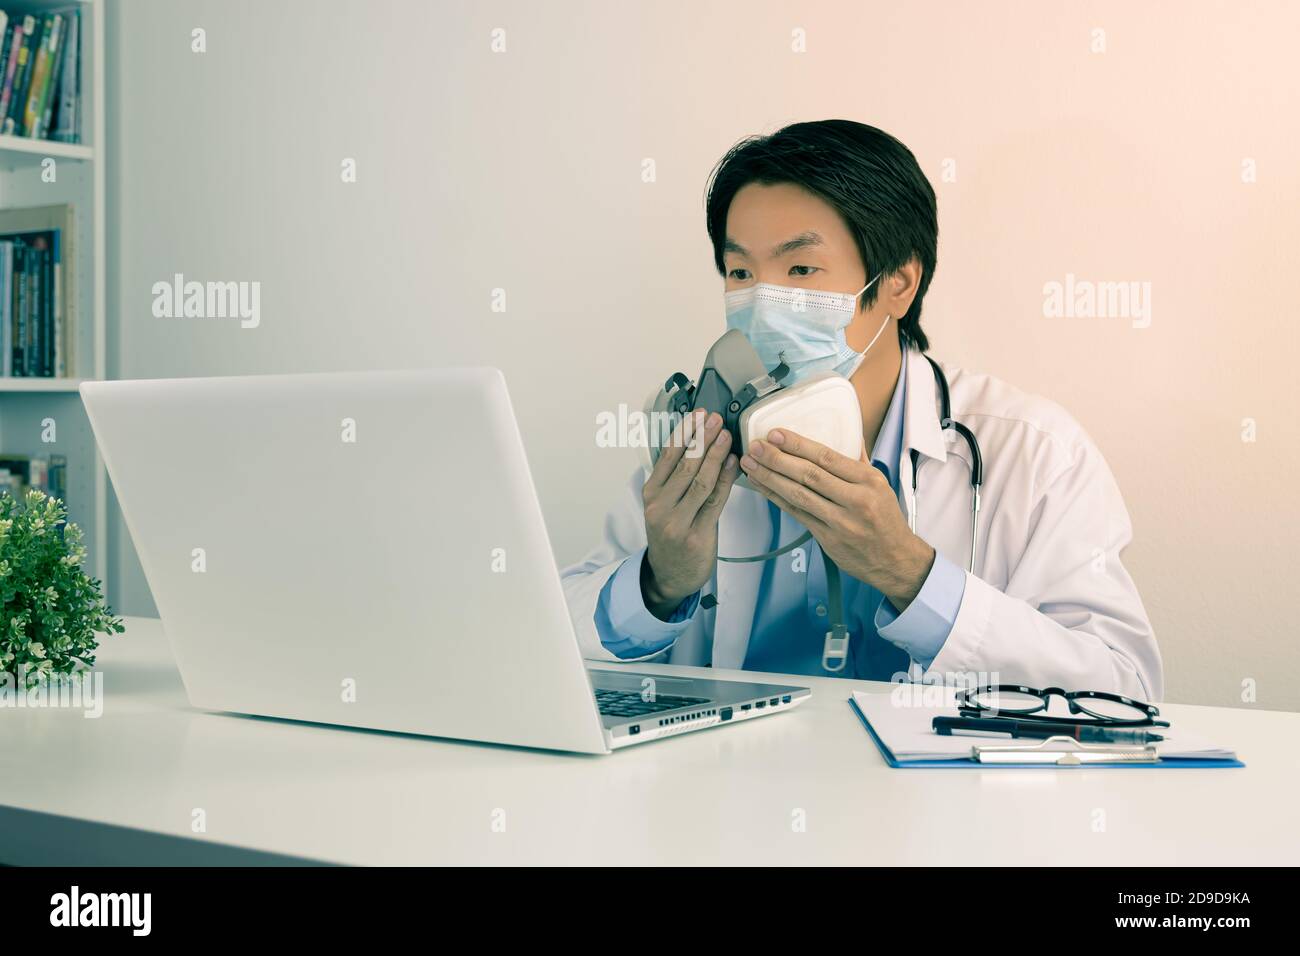 Young Asian Doctor Man in Lab Coat or Gown with Stethoscope Wear Face Mask Demonstrate Filter Mask Using with Patient Via Laptop Computer in Office in Stock Photo